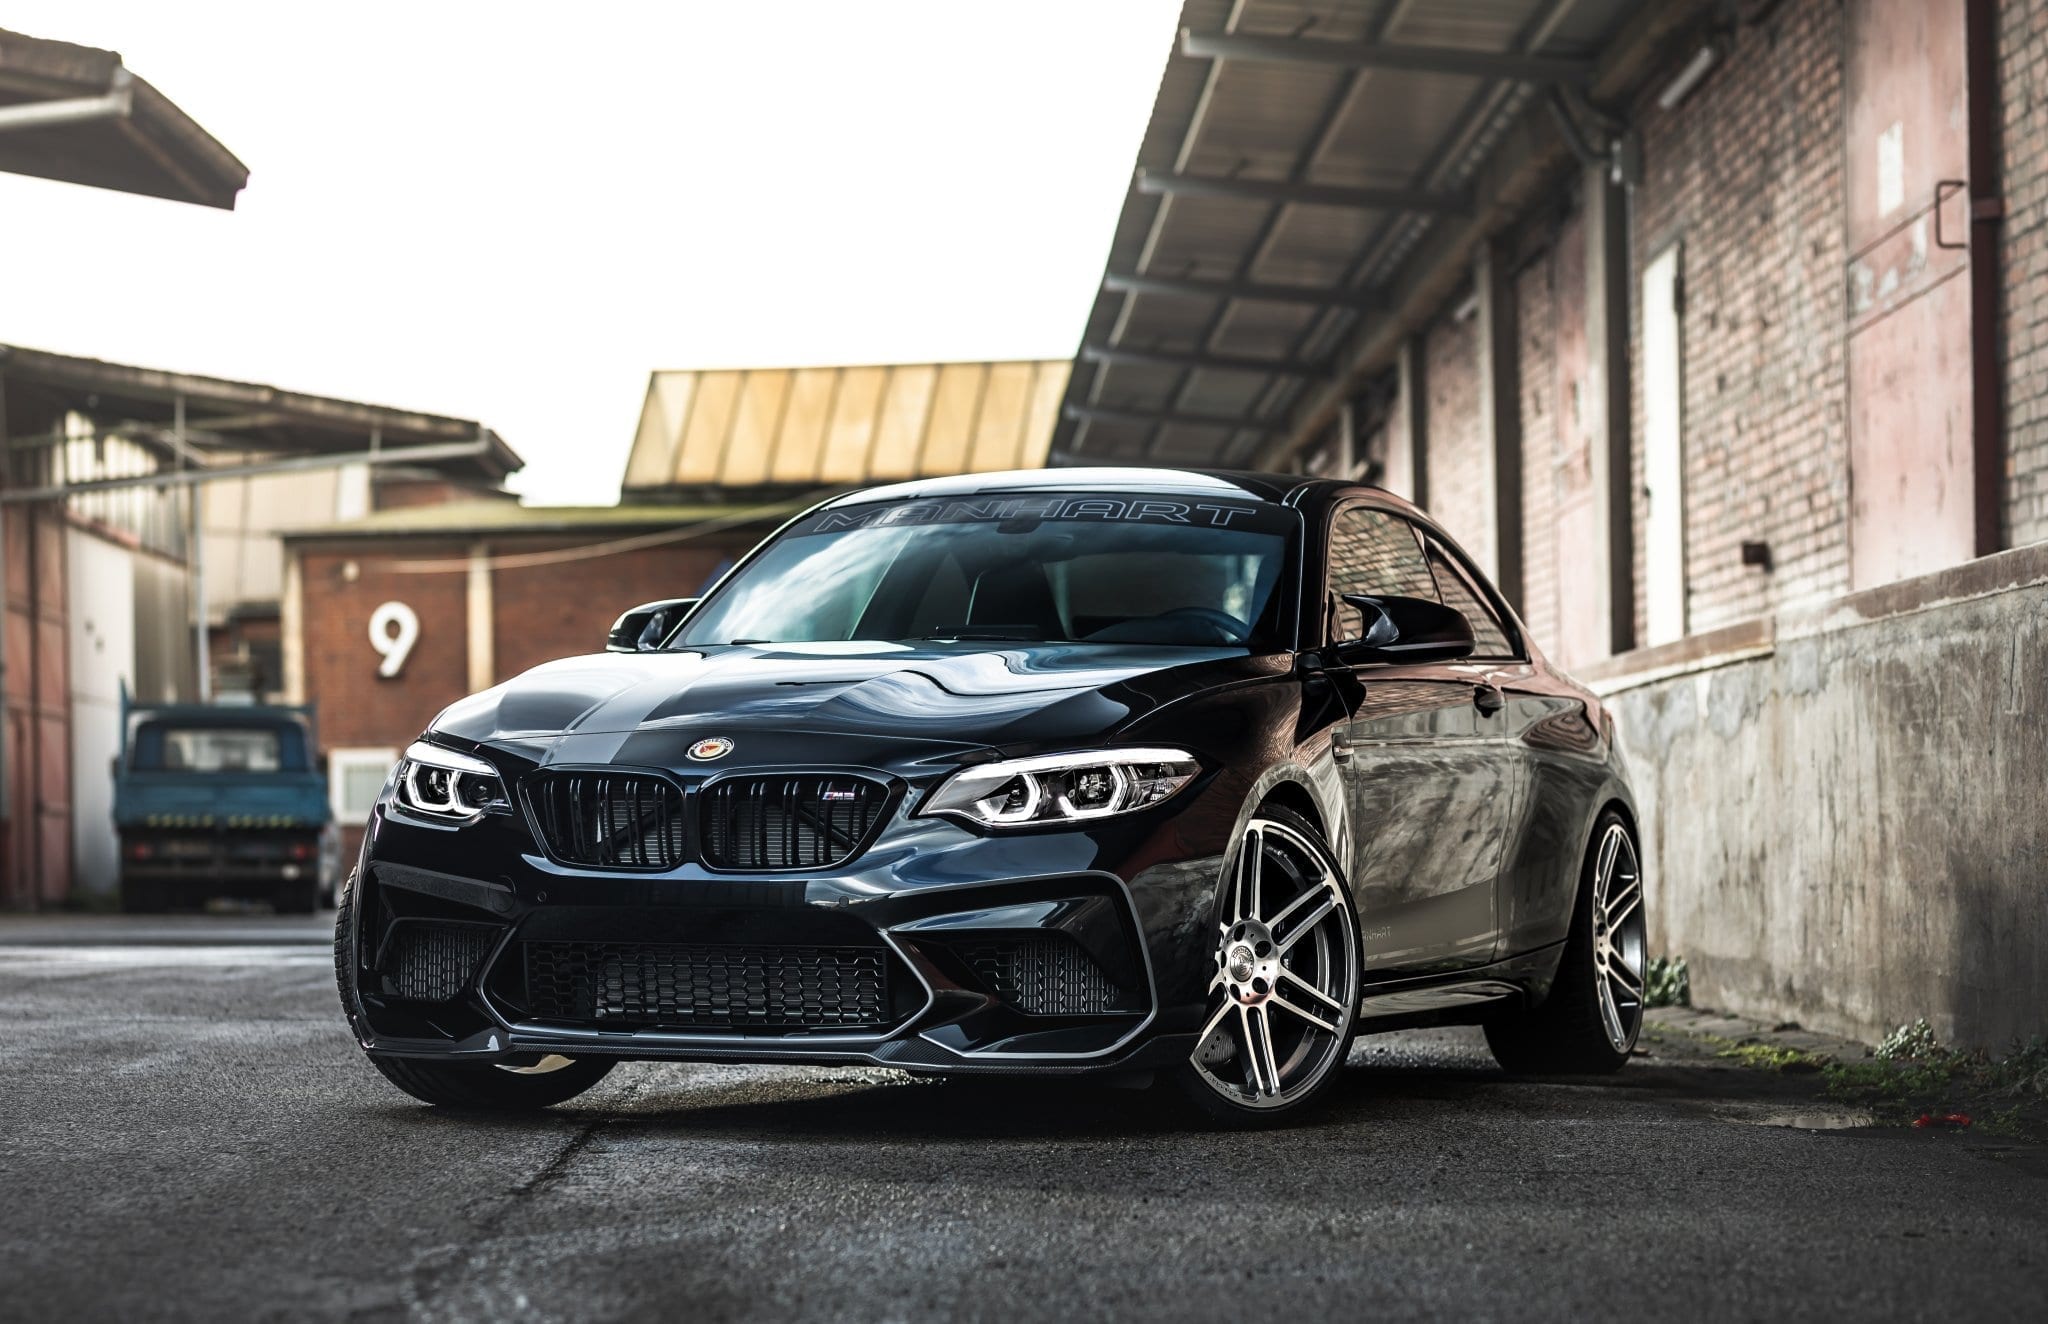 Manhart's “MH2 500” Tuning Package Takes the BMW M2 Competition to